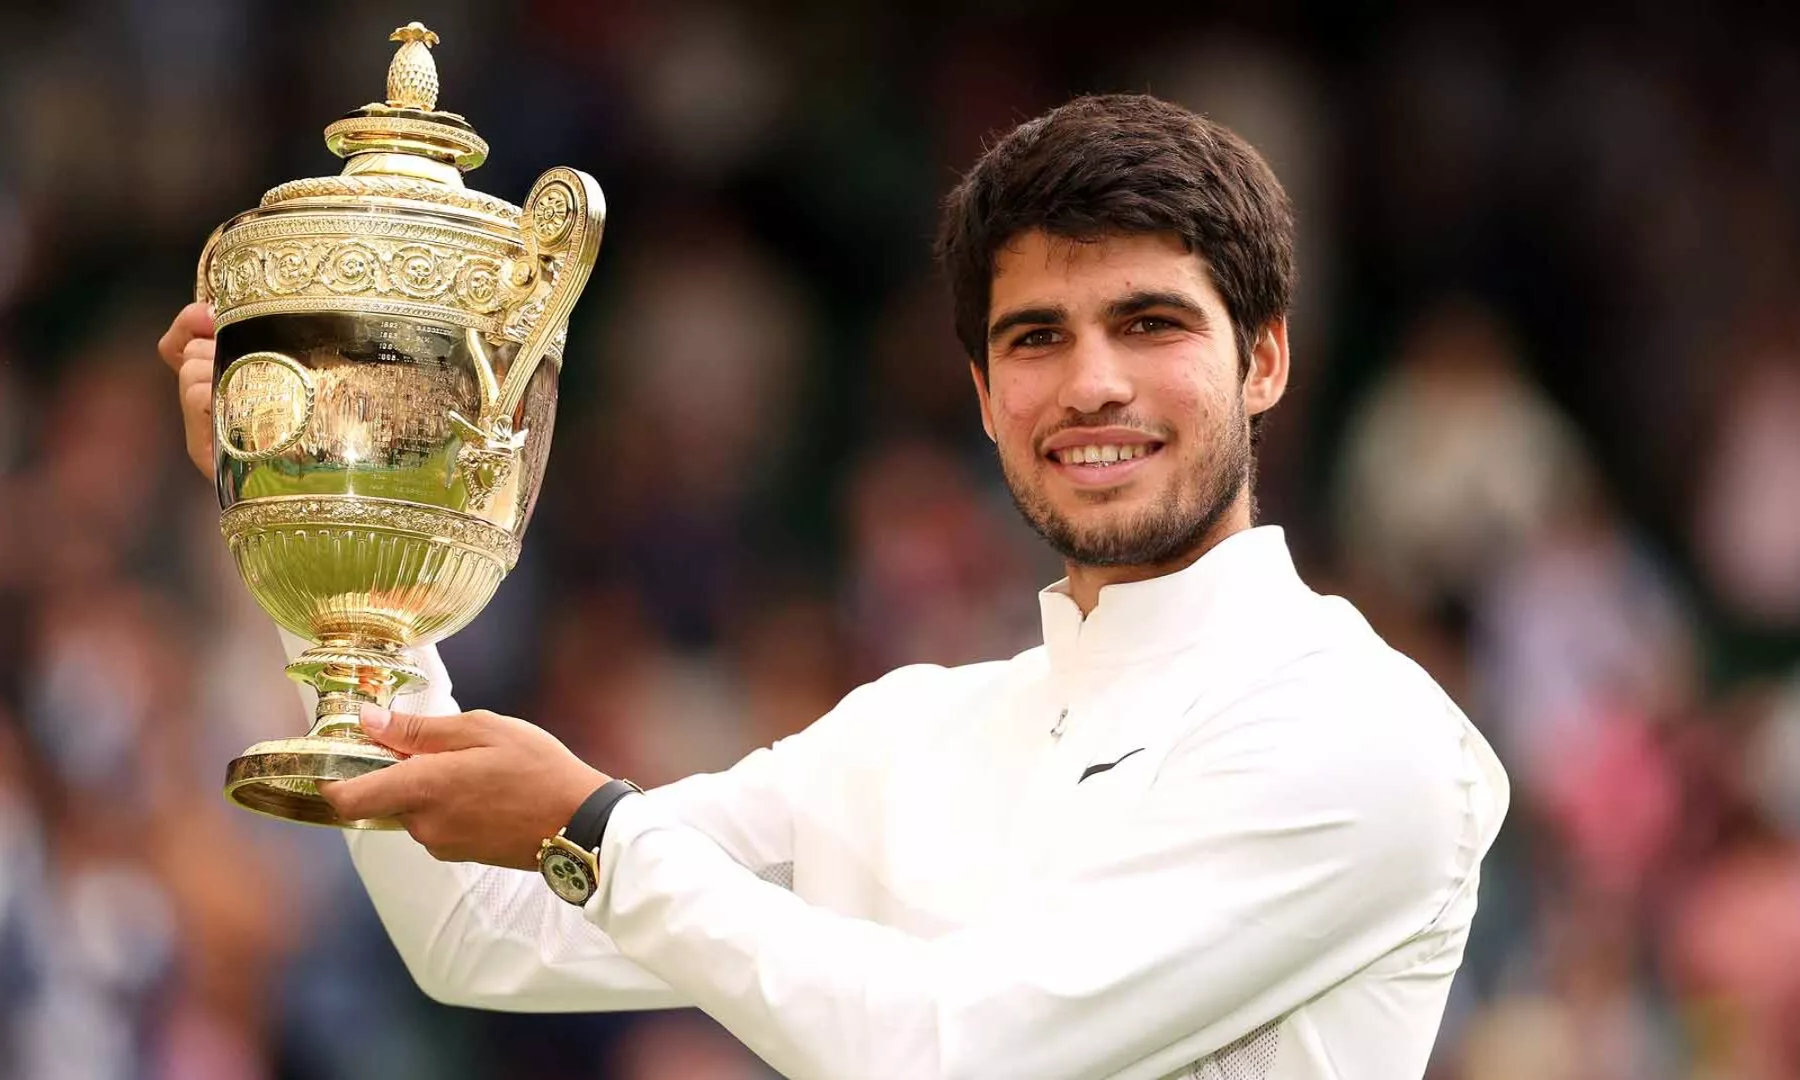 Players to make multiple men's singles Grand Slam finals before turning 21 this century